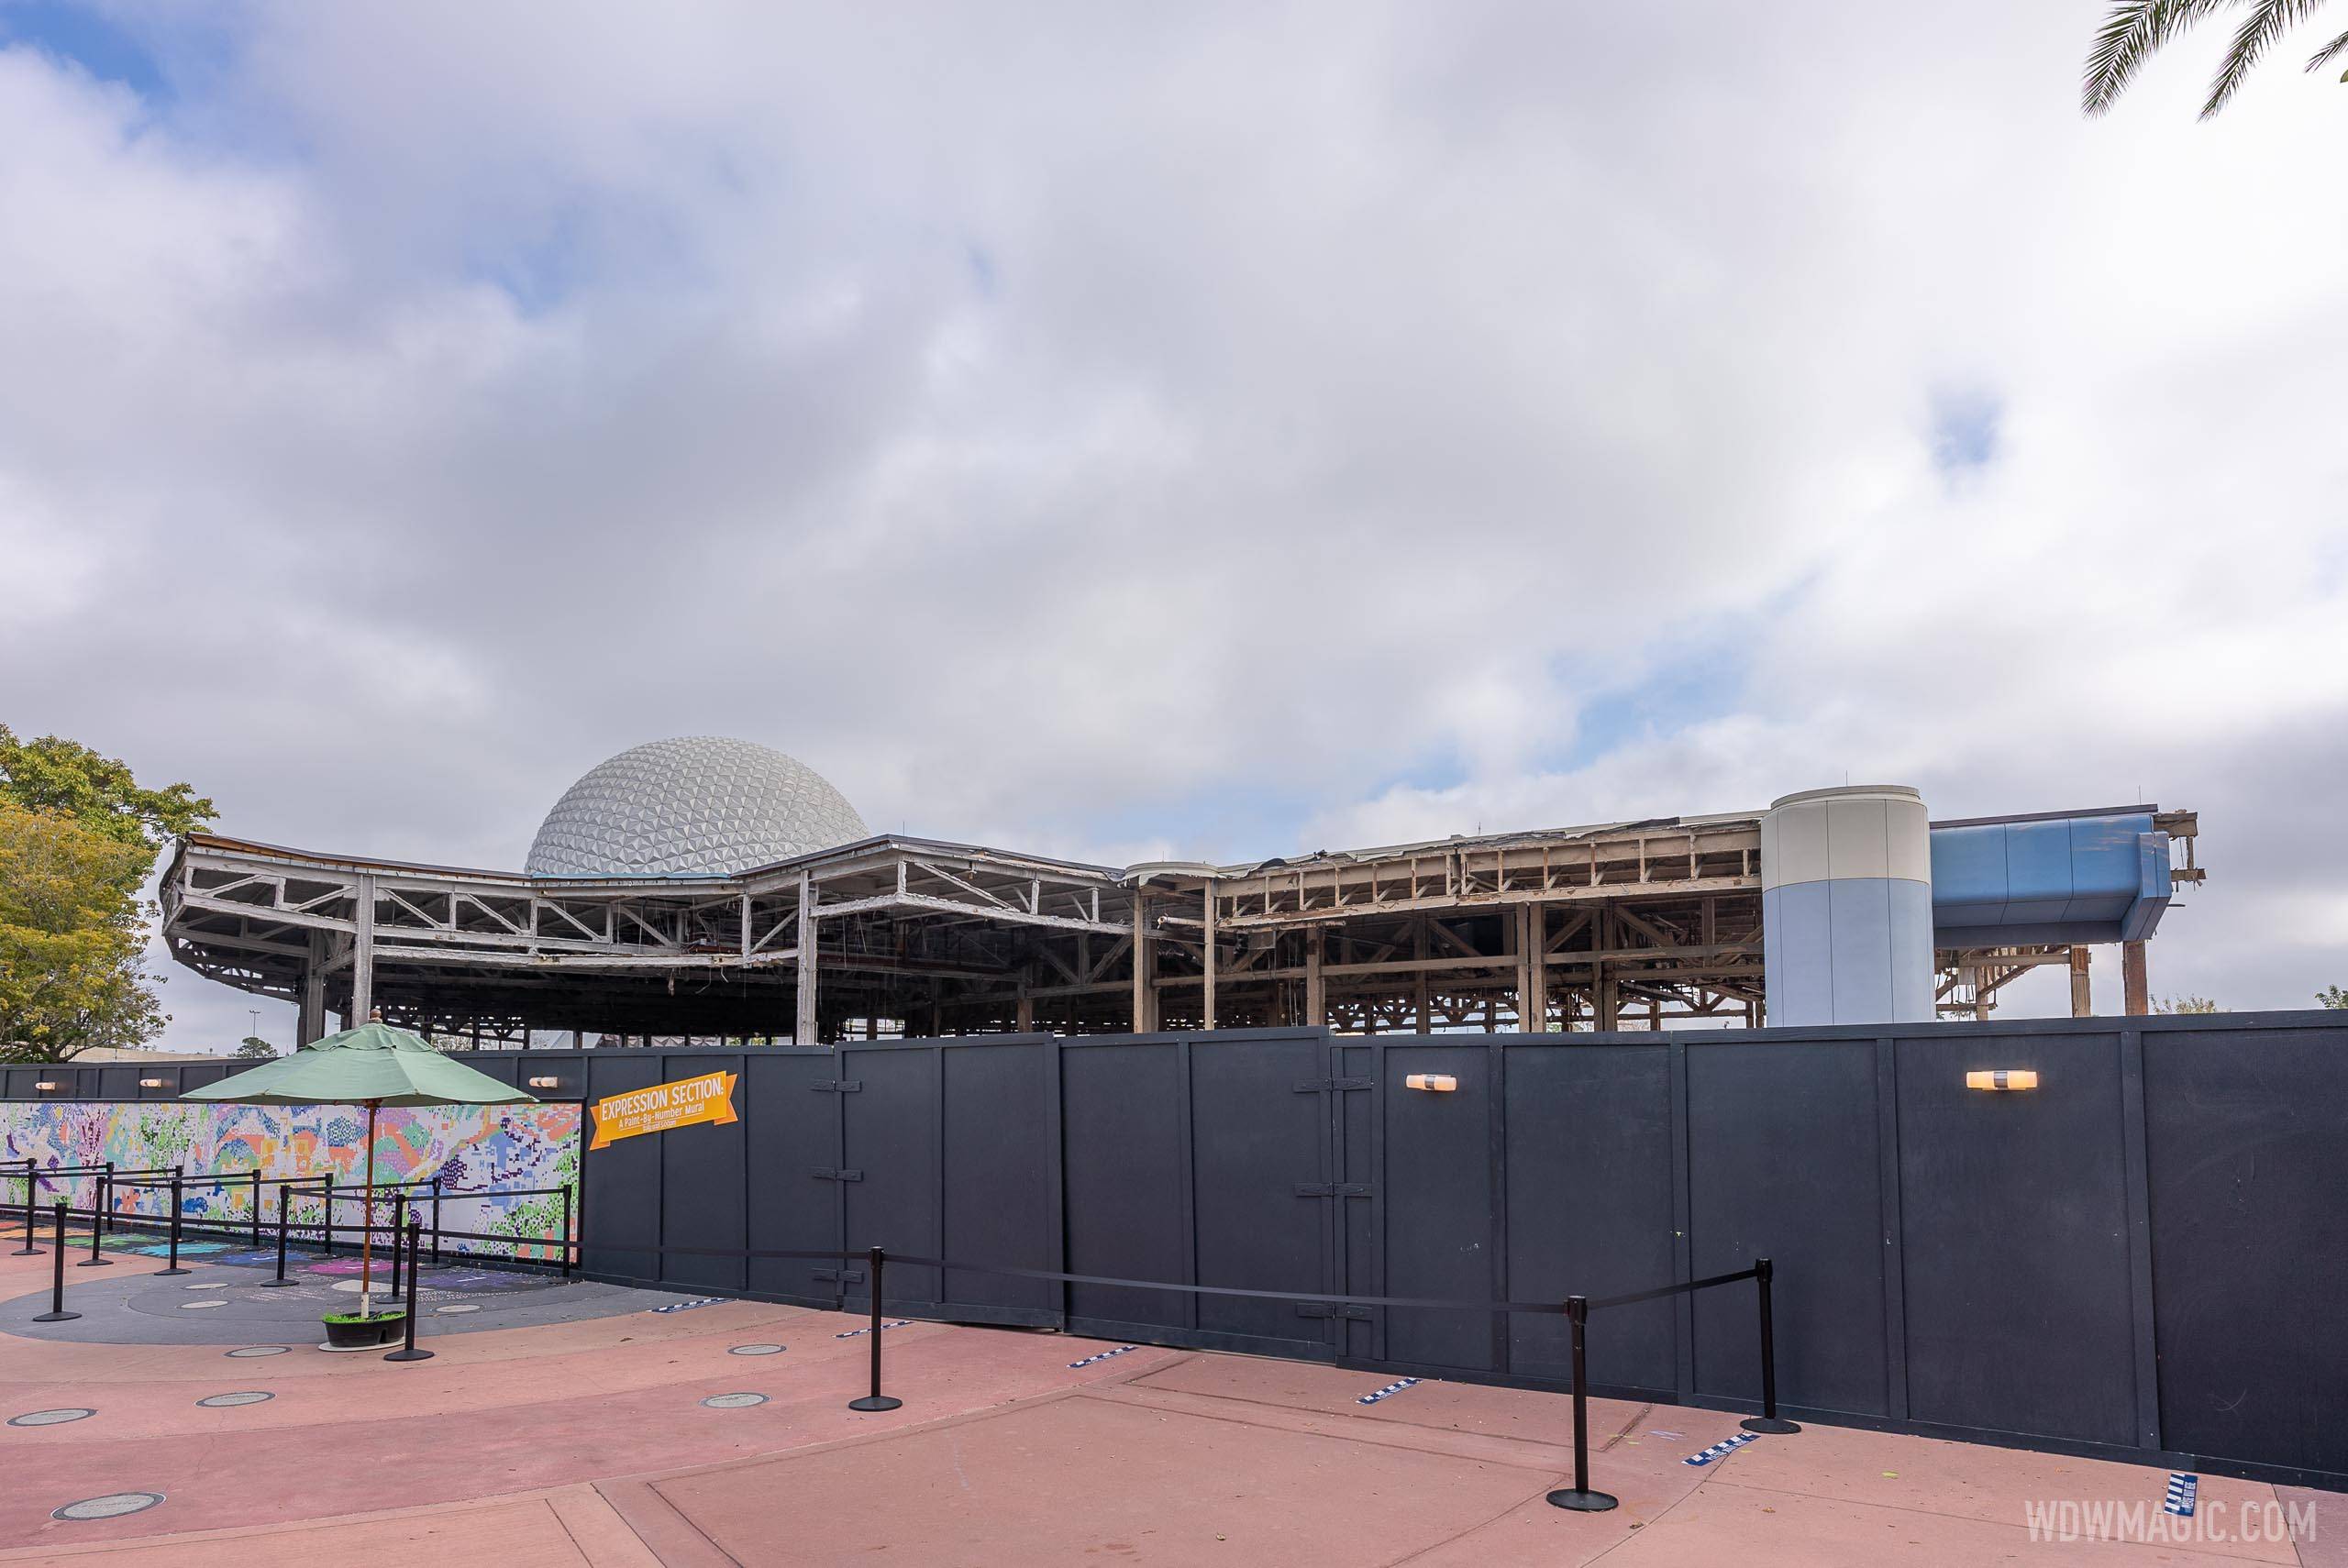 EPCOT Innoventions West demolition - January 26 2021